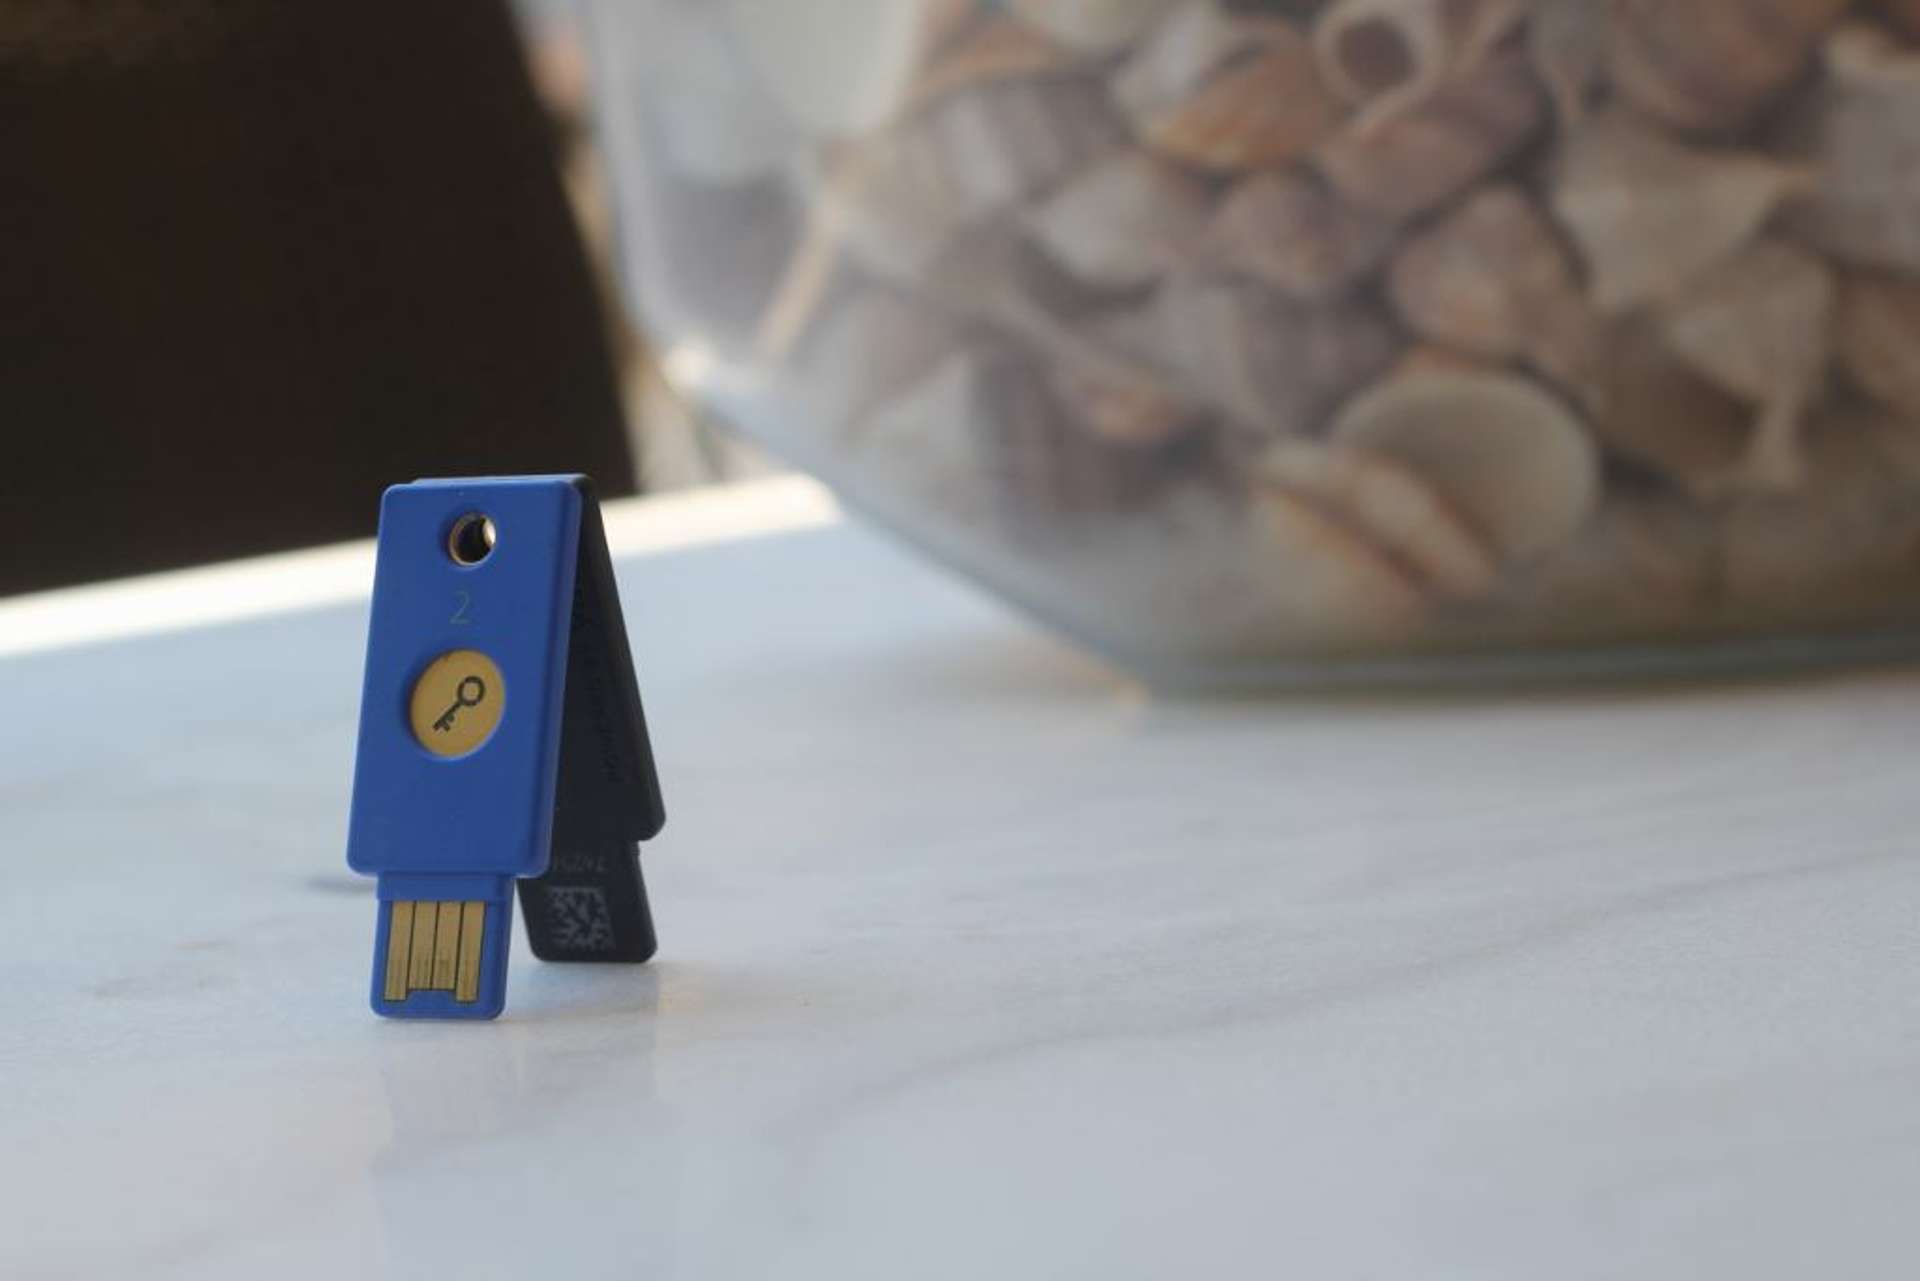 Two yubikeys balancing against each other on a table